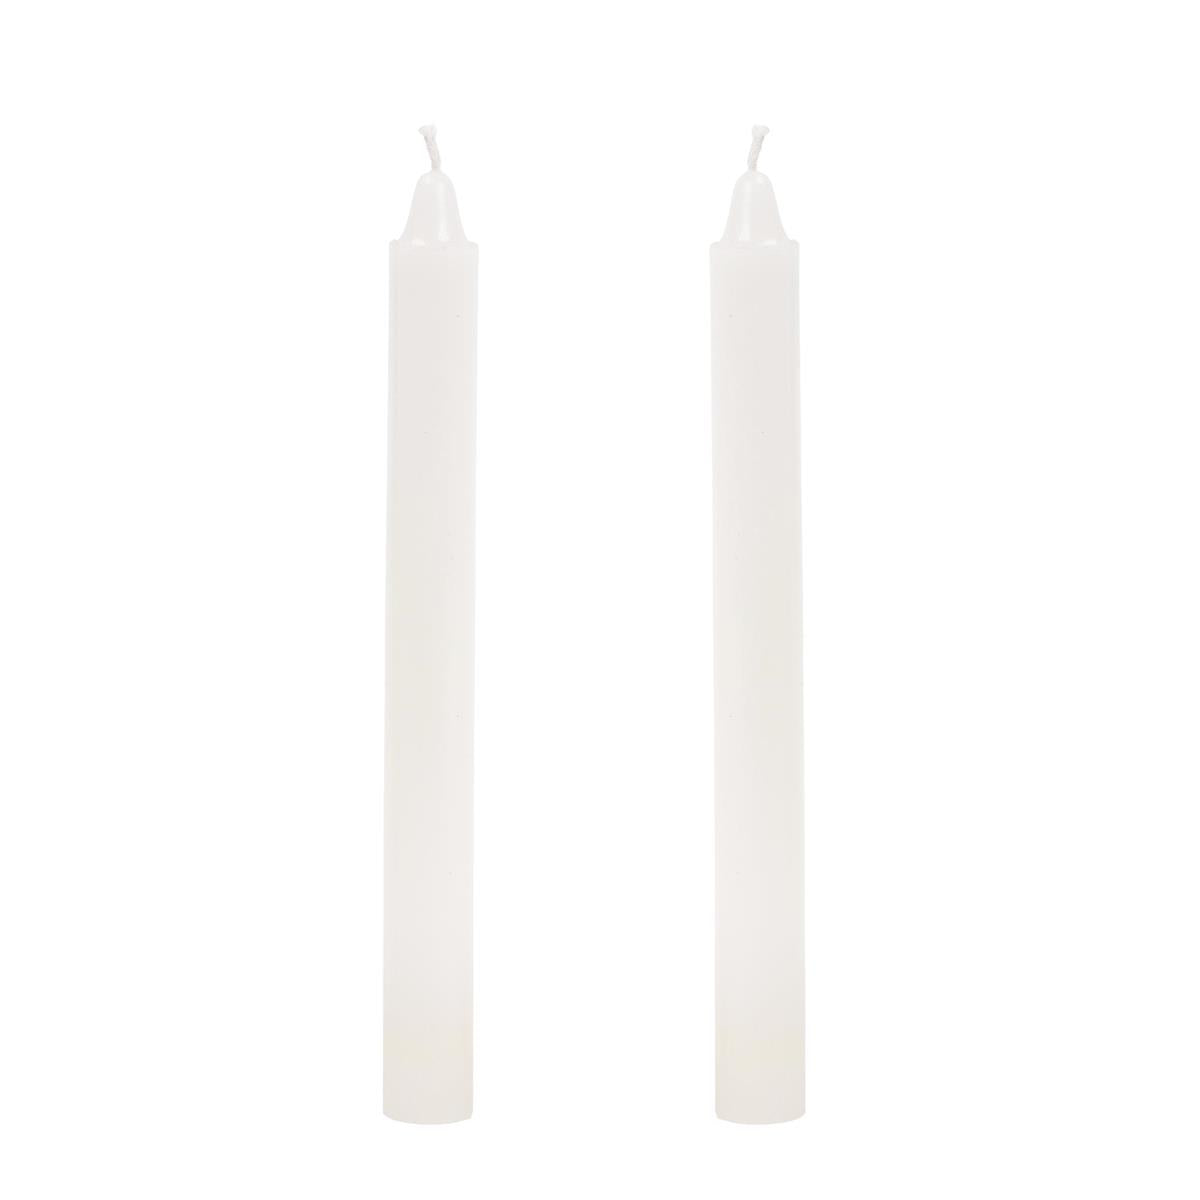 Radiance 7-Inch White Dinner Candle, Unscented with 6.5 Hours Burn Time